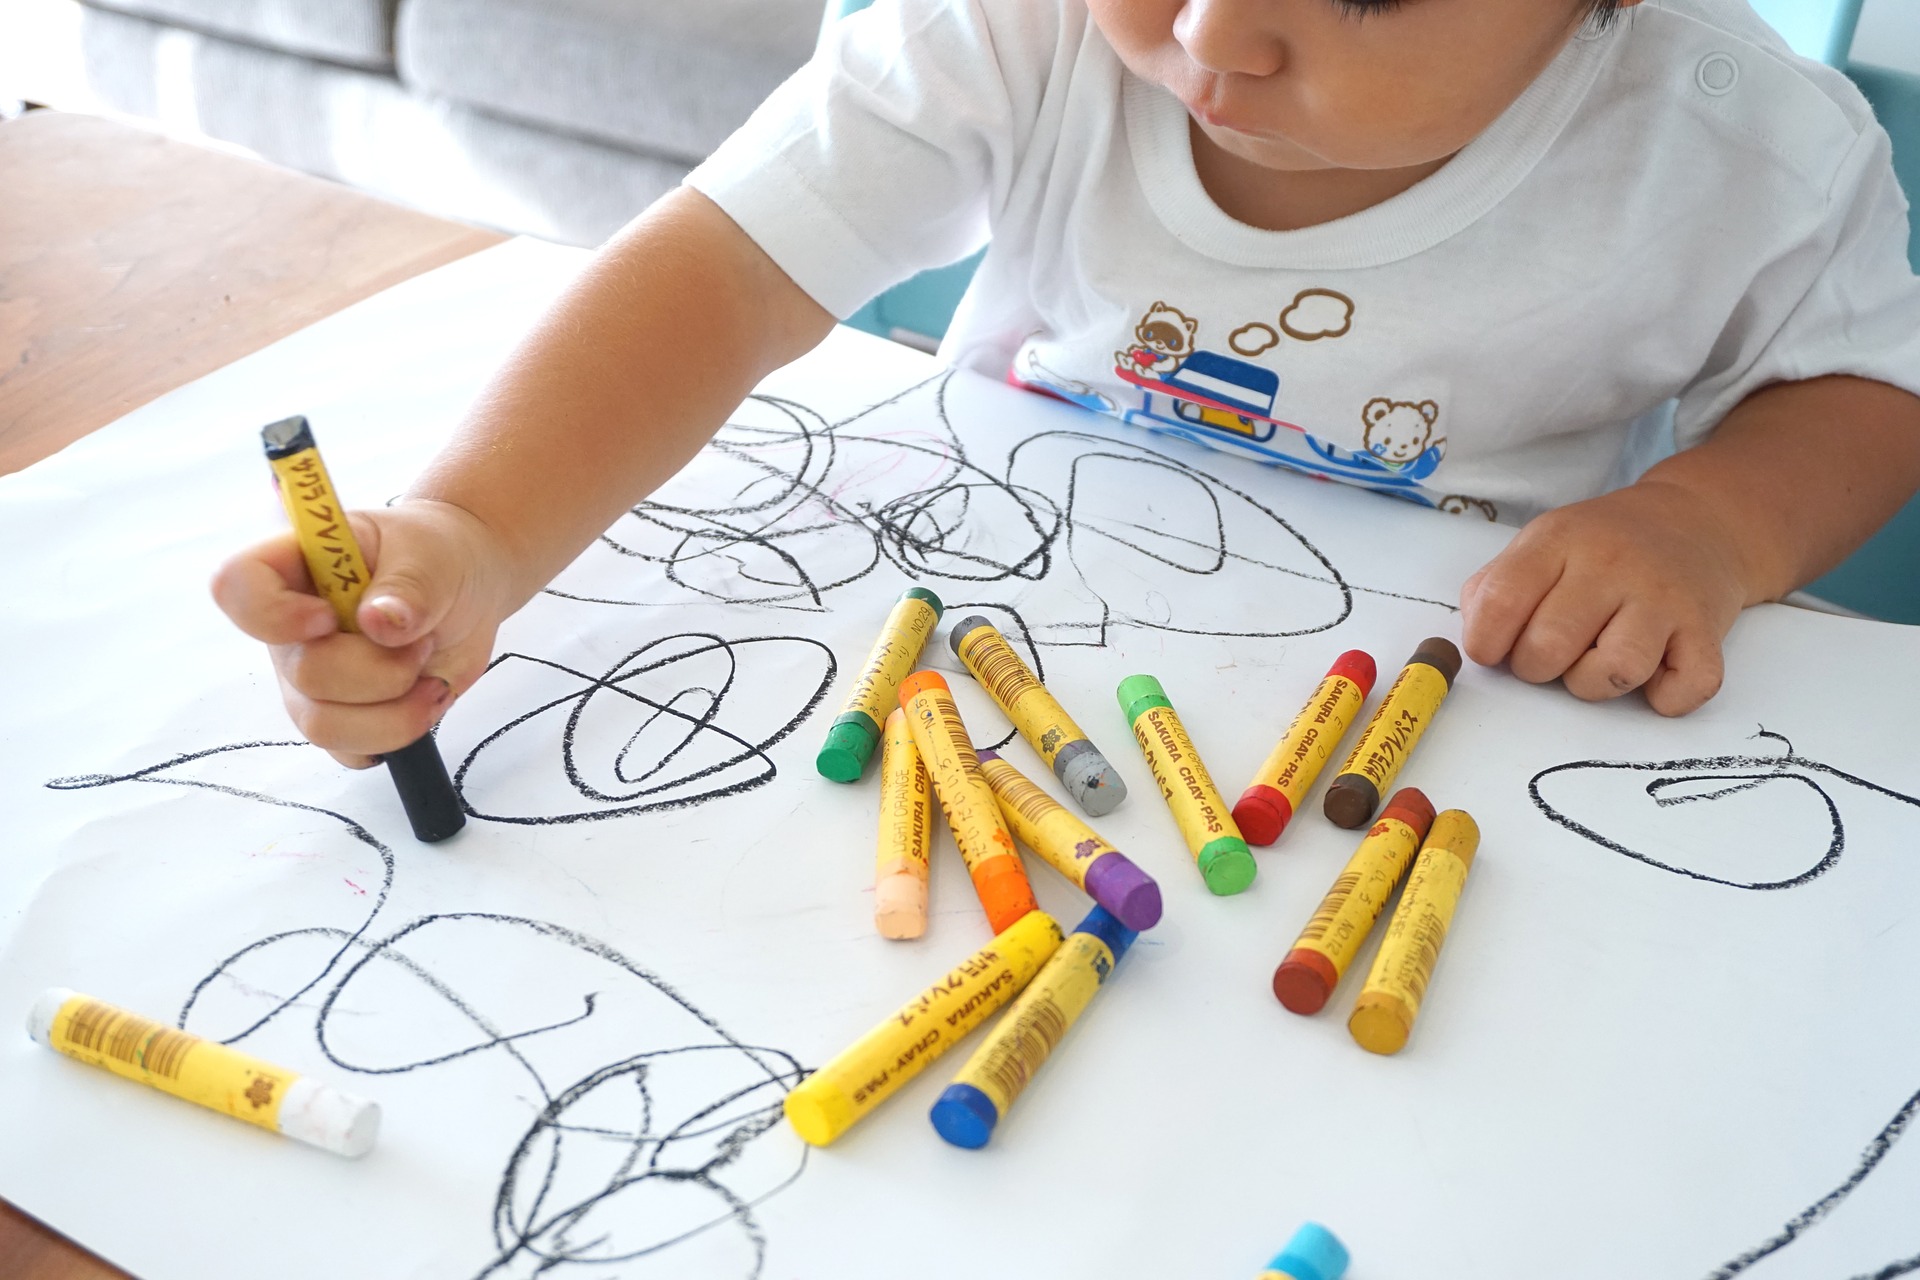 A view from above of a child scribbling with colorful crayons on a large piece of paper.